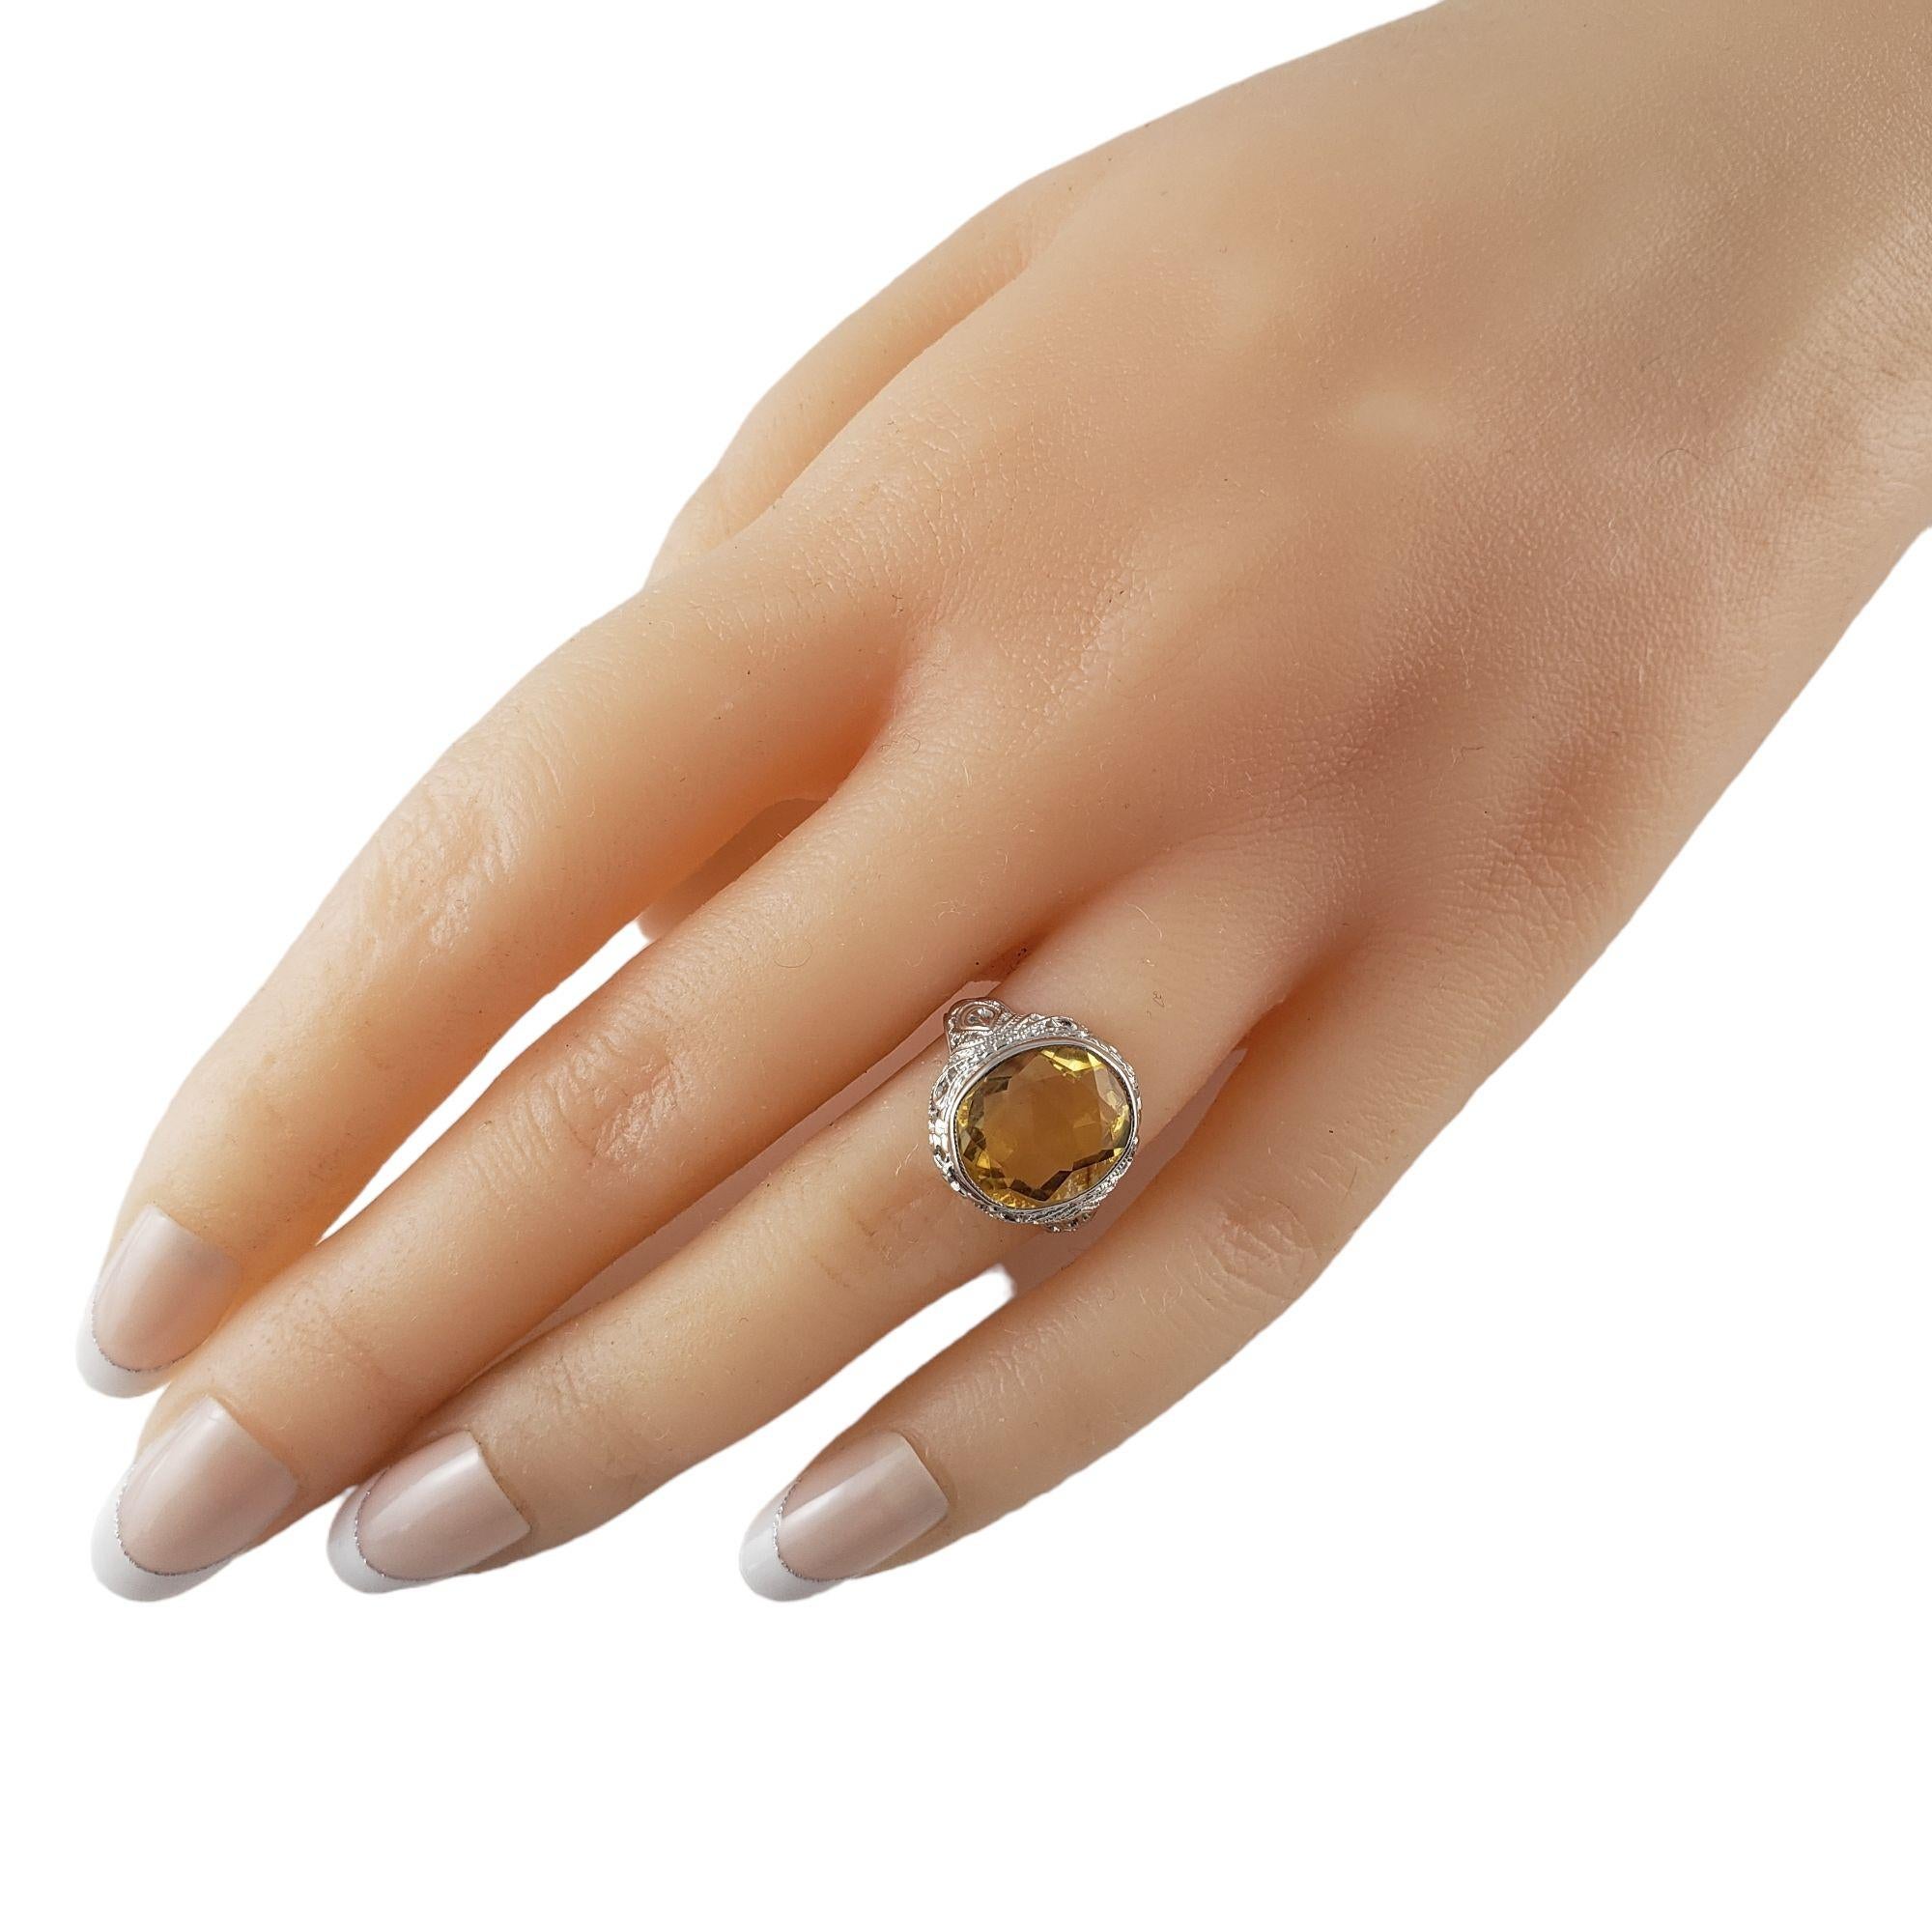 10 Karat White Gold and Citrine Ring Size 3.5 #14209 For Sale 2